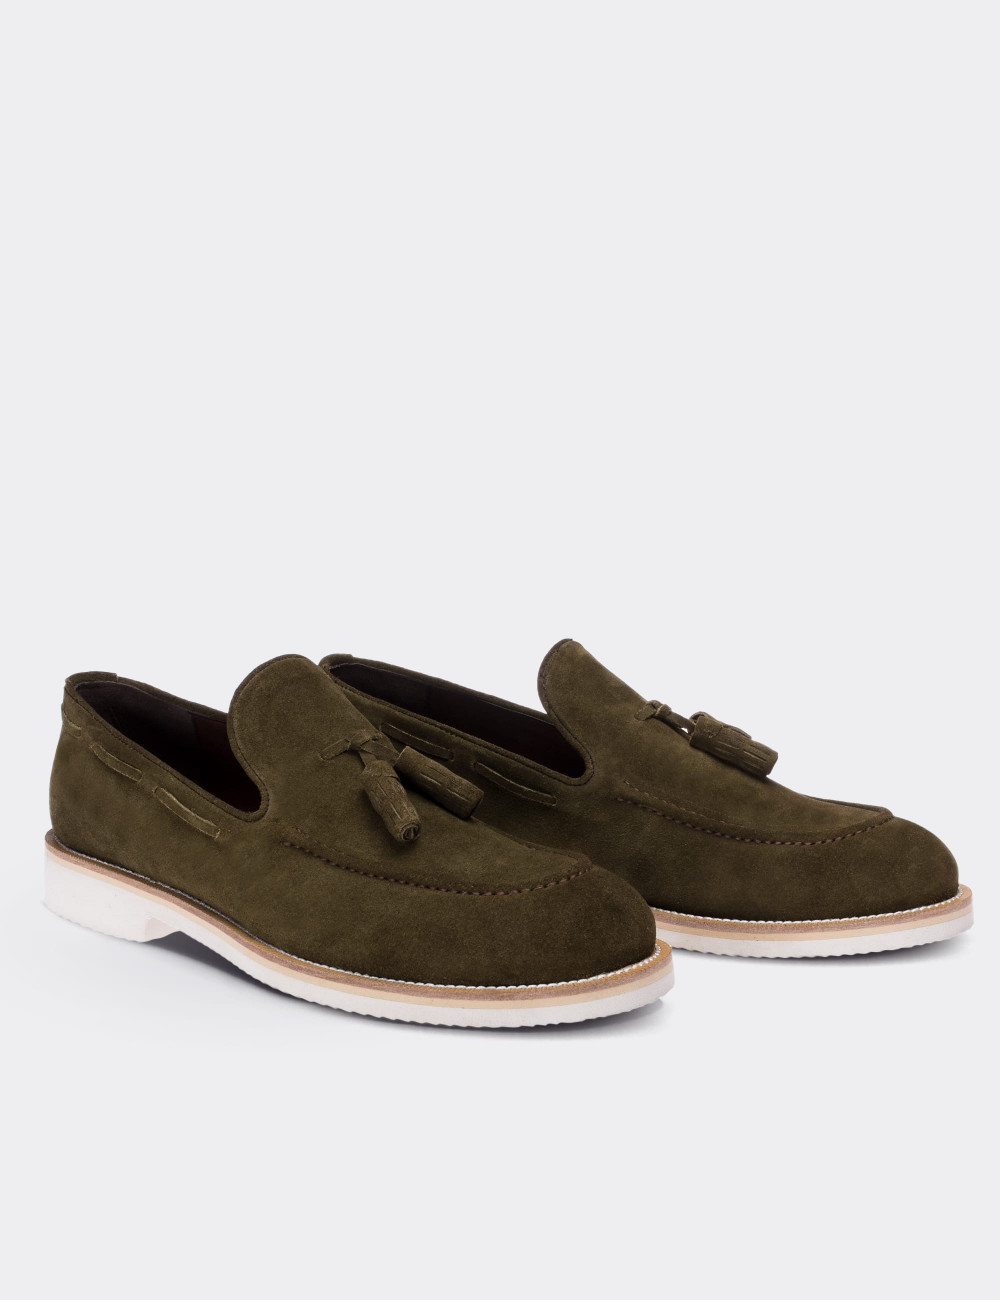 Green Suede Leather Loafers Shoes 01319MYSLE03 - Deery